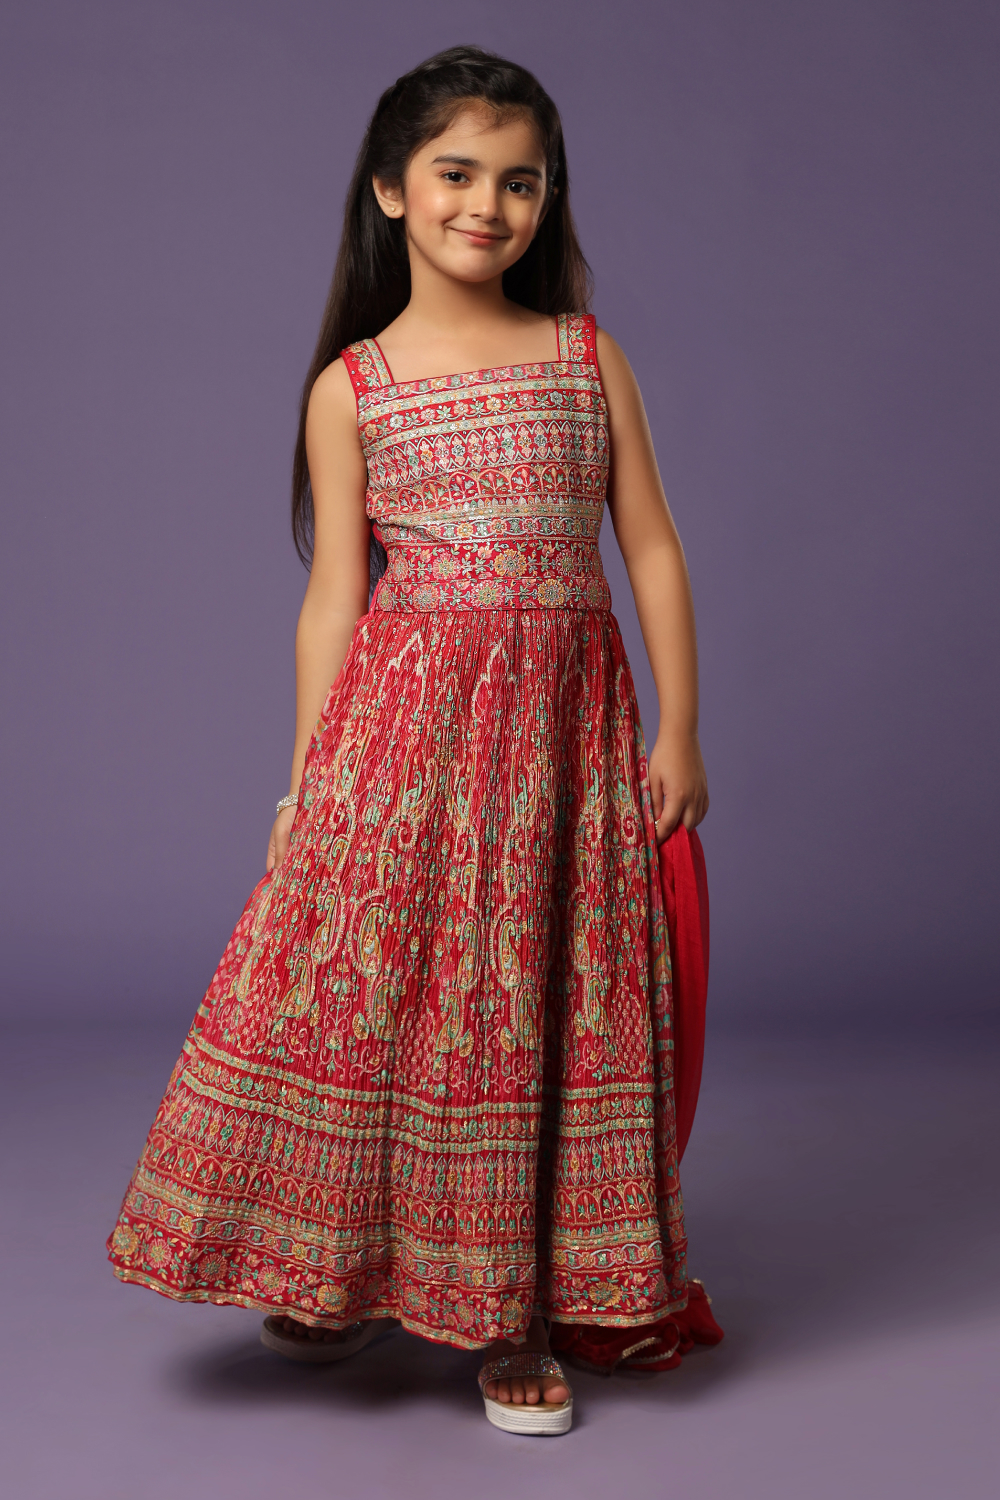 SKY Girl KIDS Party Wear Gowns at Rs 1249/piece in Surat | ID: 23086369173